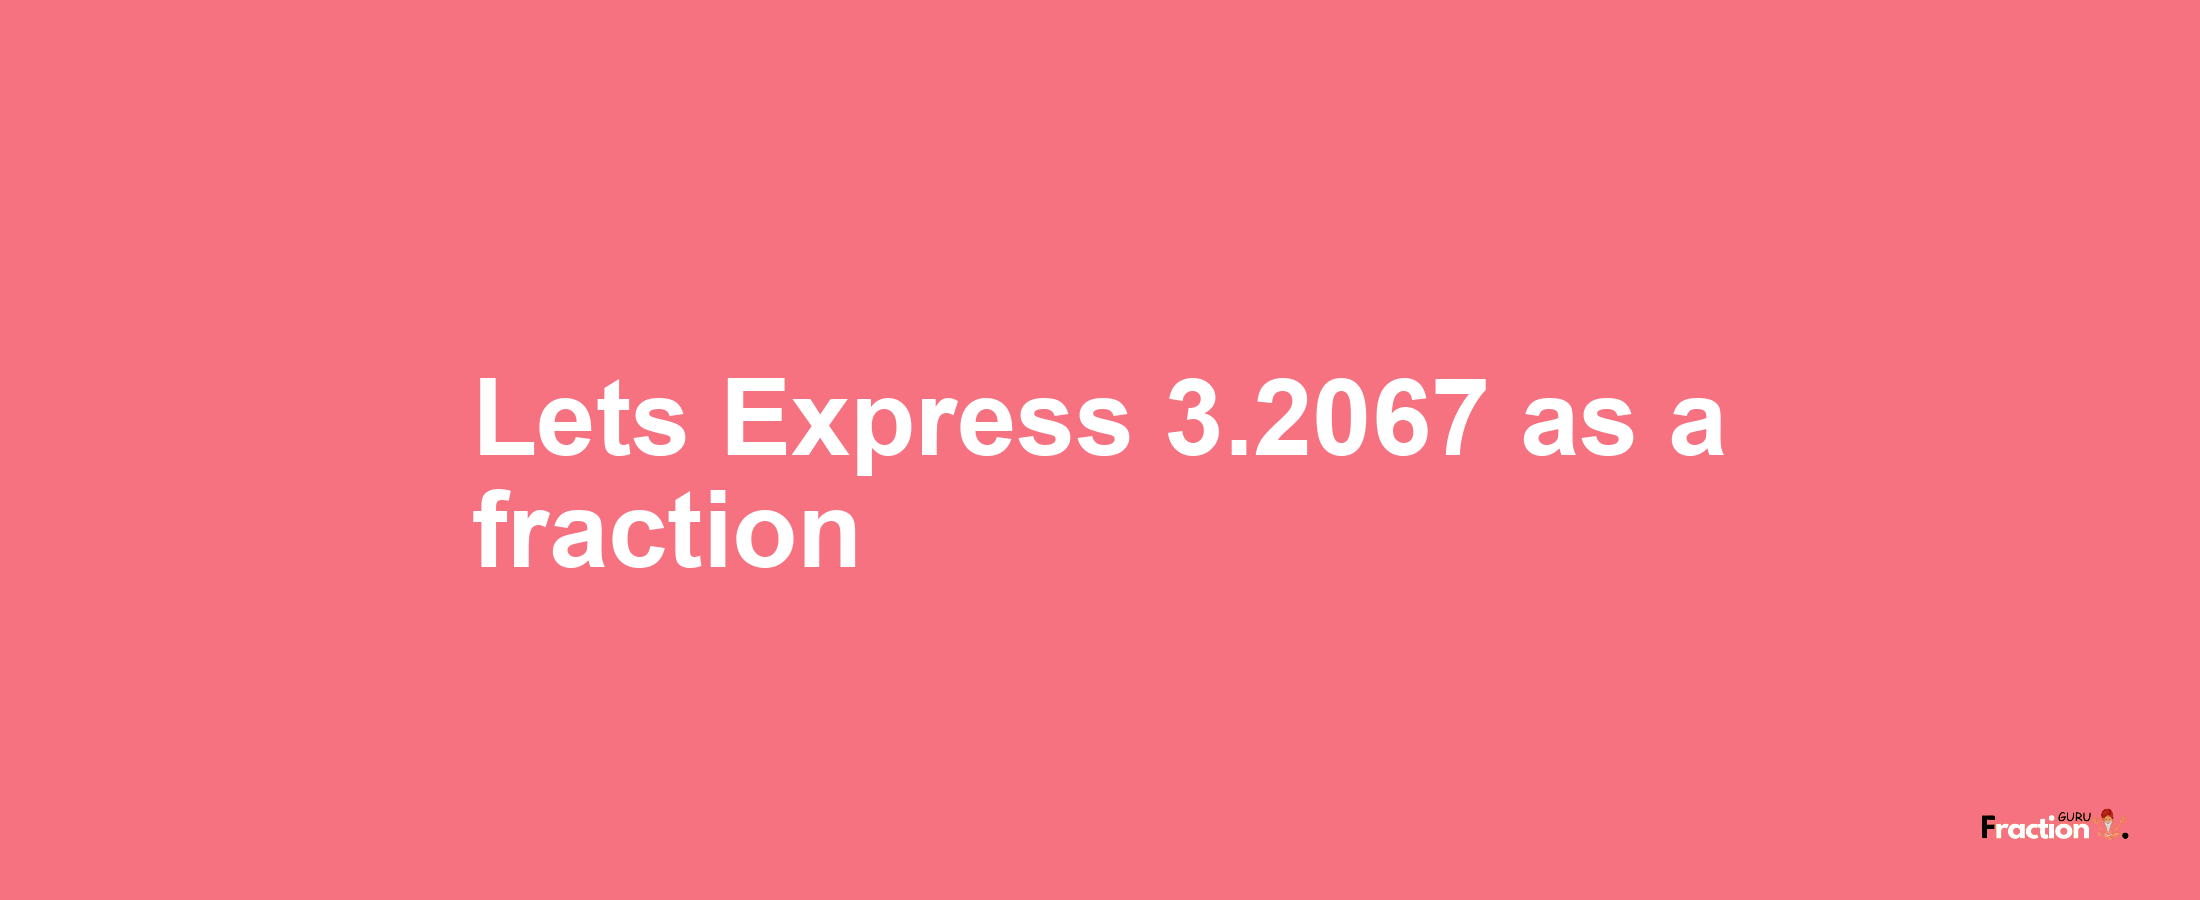 Lets Express 3.2067 as afraction